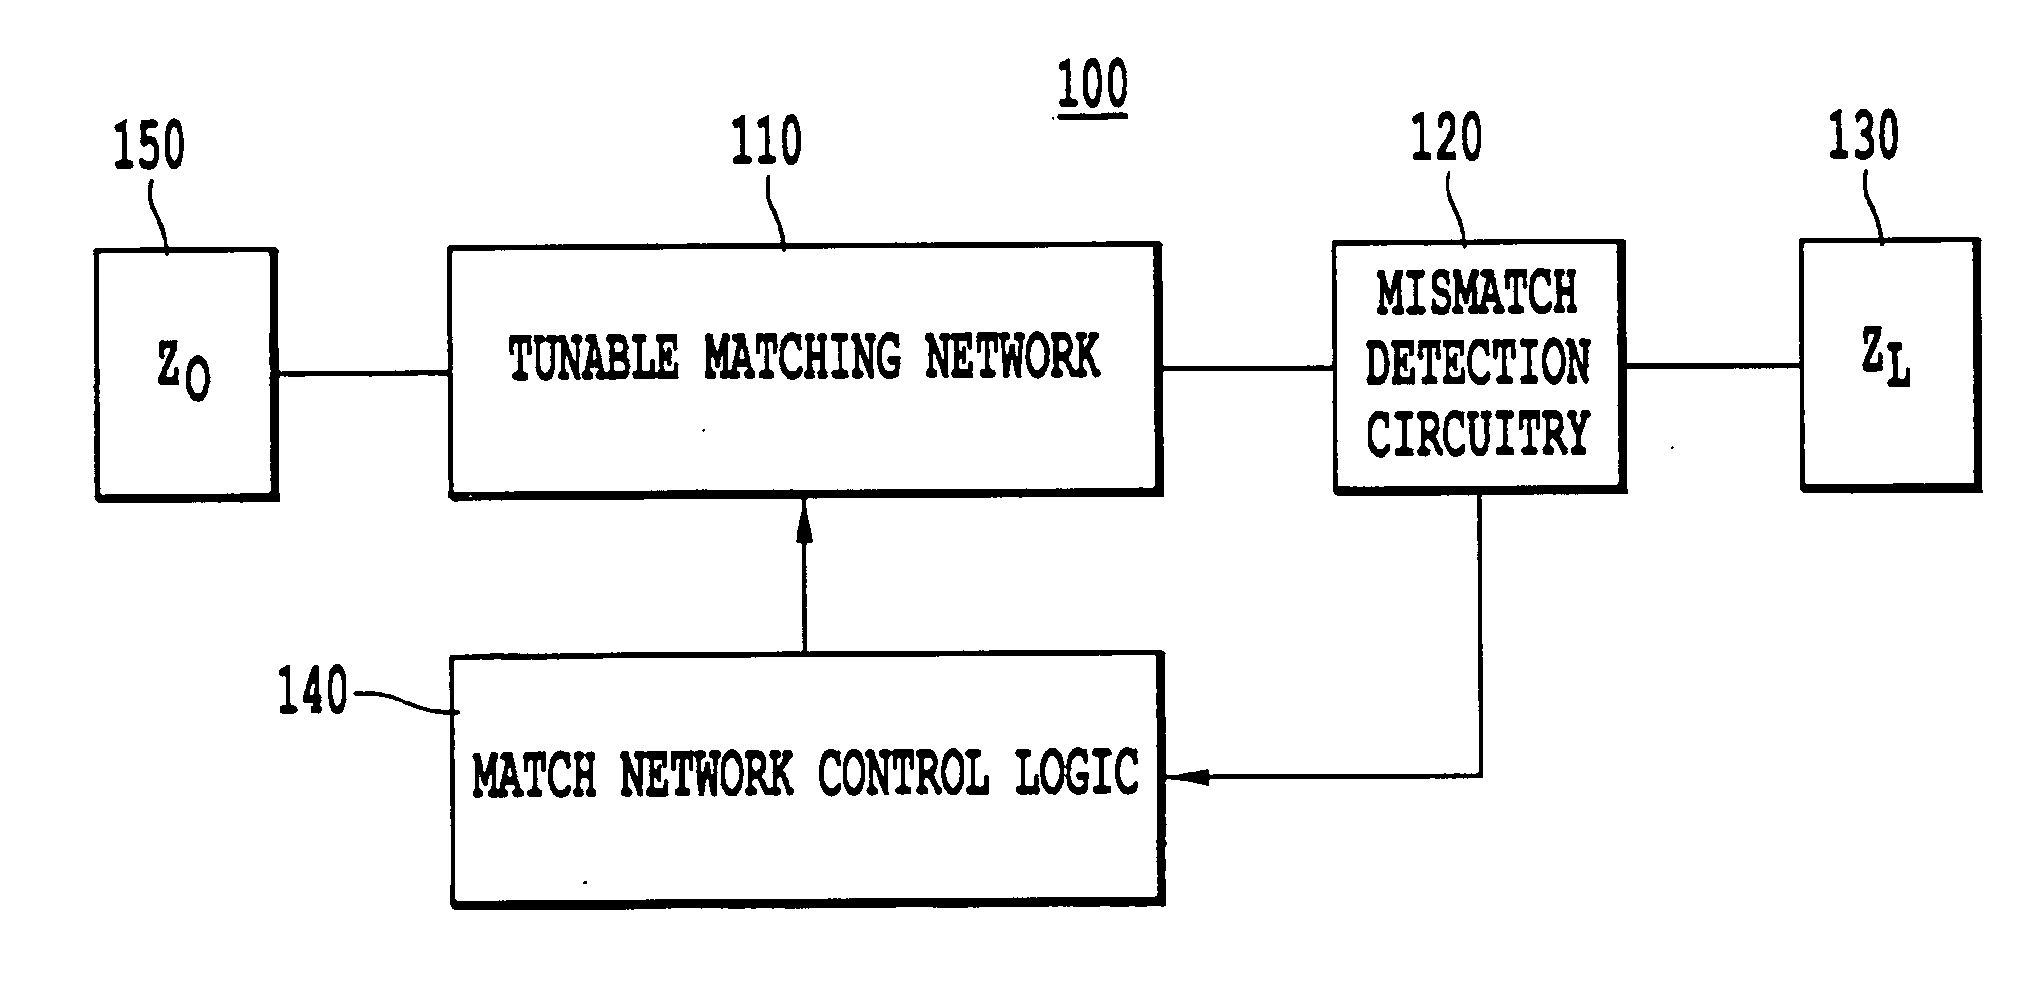 Apparatus and method of selecting components for a reconfigurable impedance match circuit